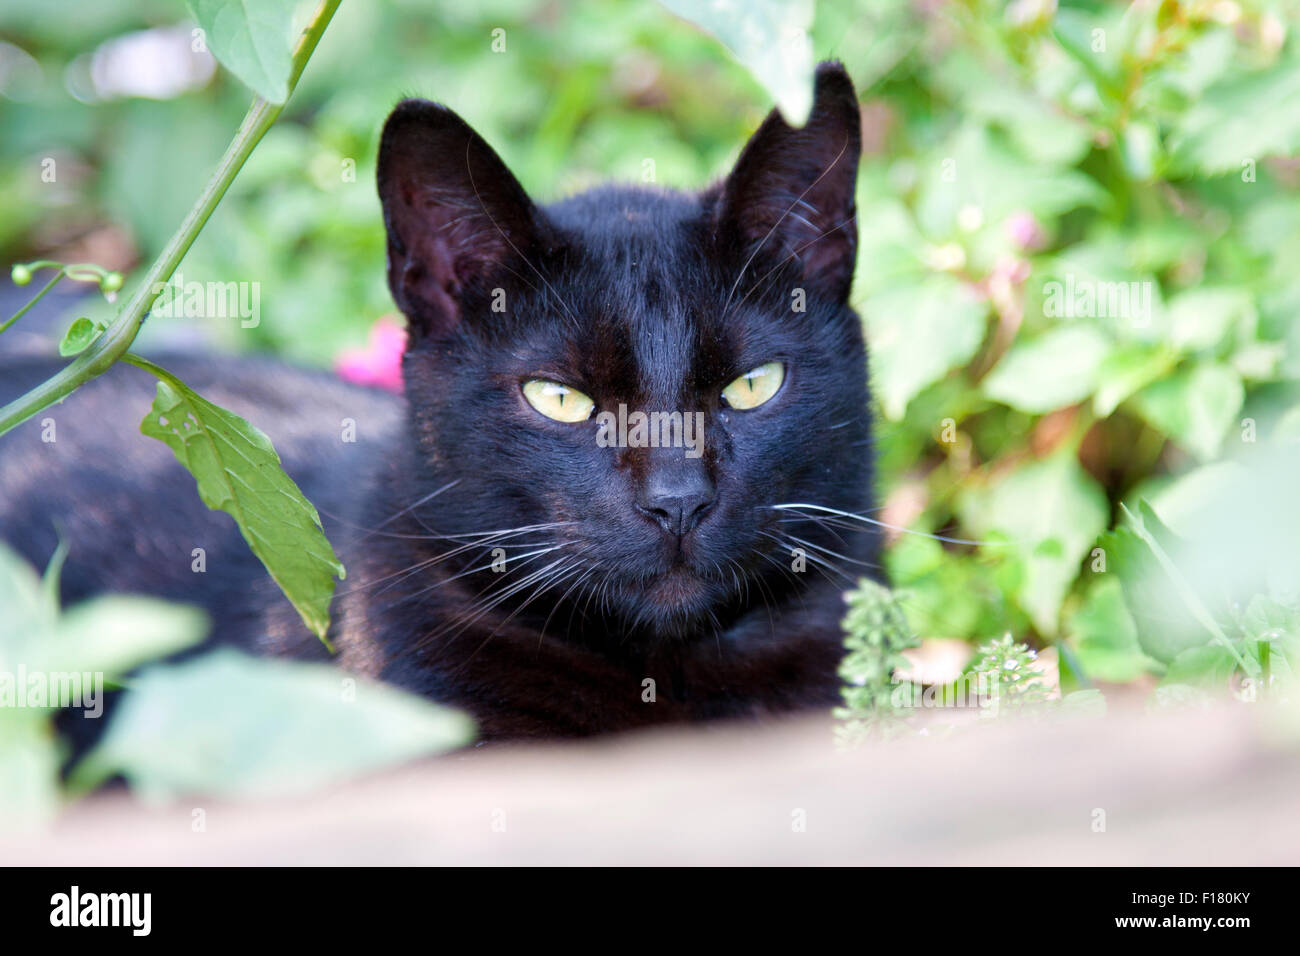 portrait of a cute black cat looking ahead Stock Photo